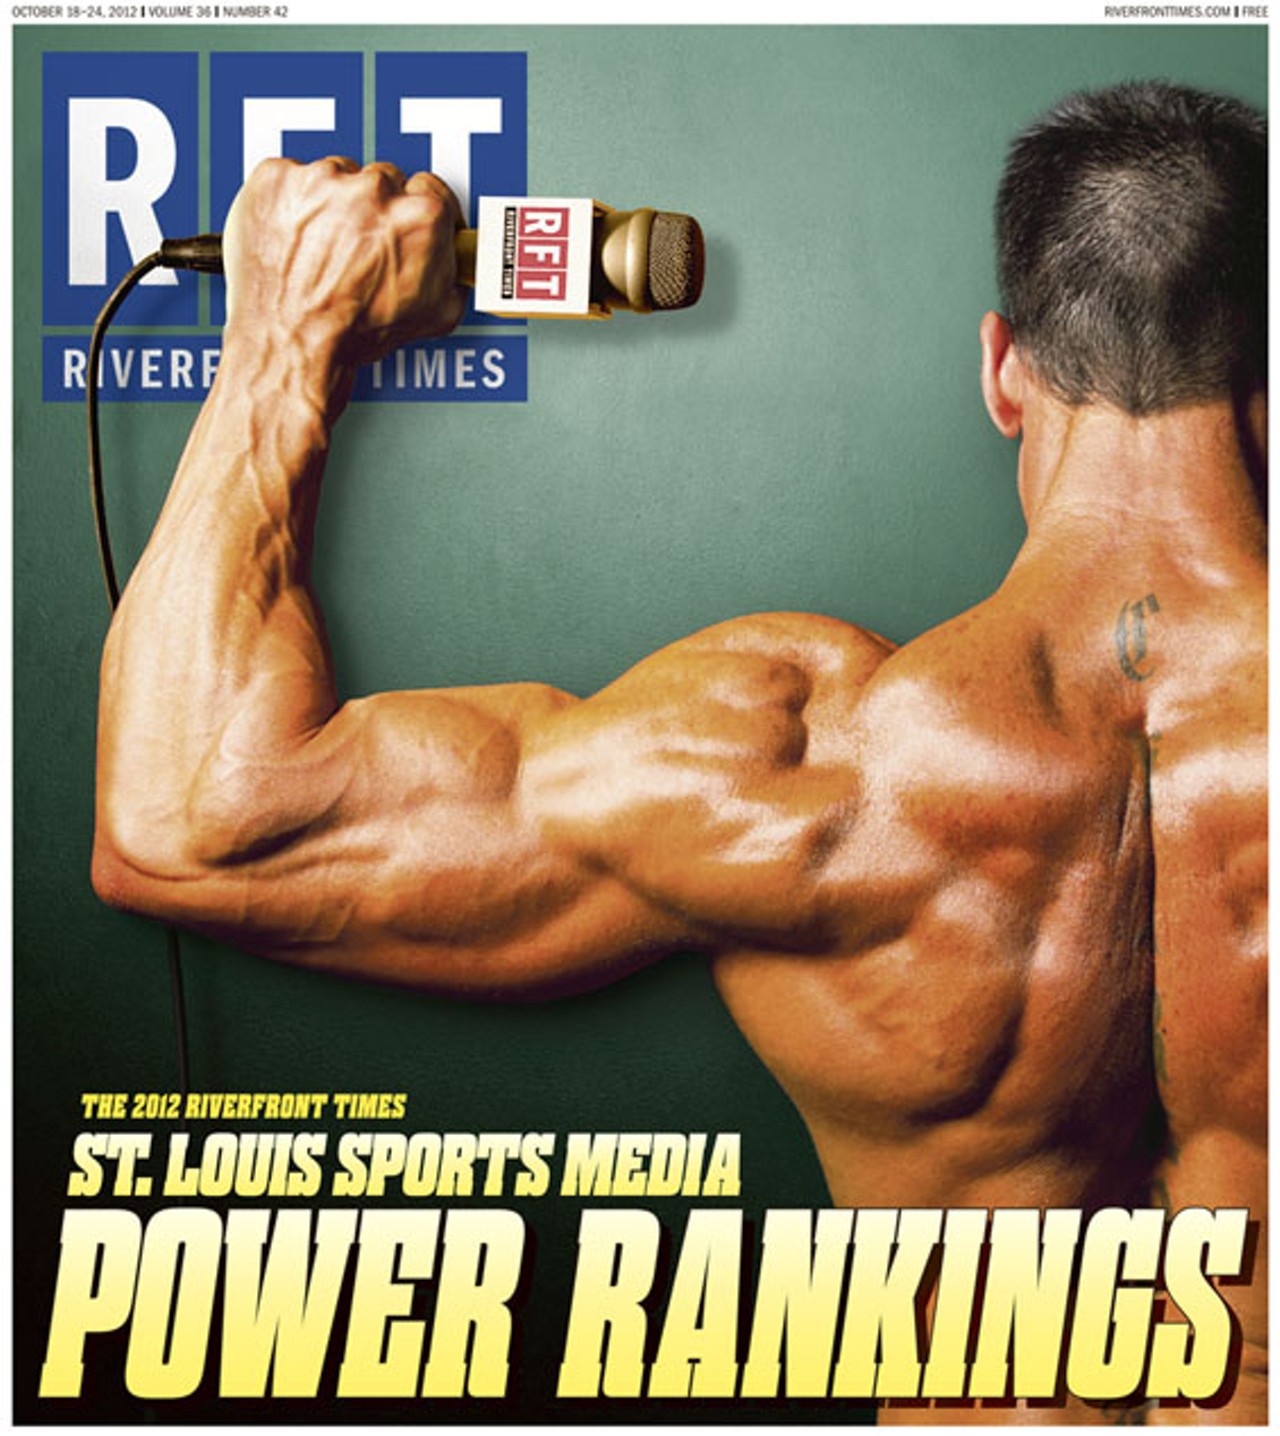 2012 RFT St. Louis Sports Media Power Rankings by RFT staff and Matt Sebek. Cover: RFT Photo-Illustration.